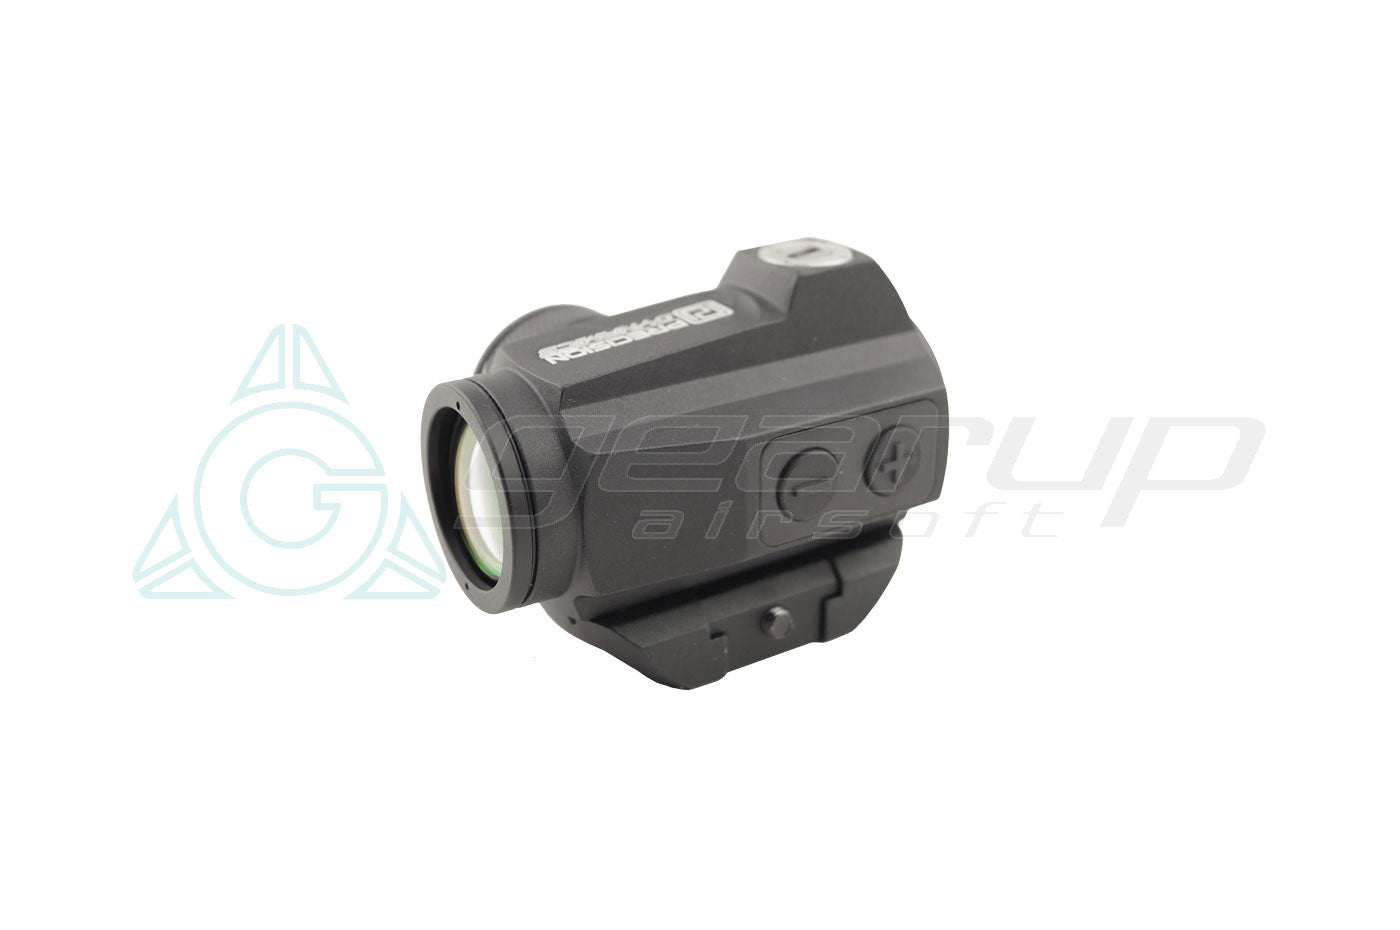 Tactical Micro Dot Sight Side Button (Shockproof)